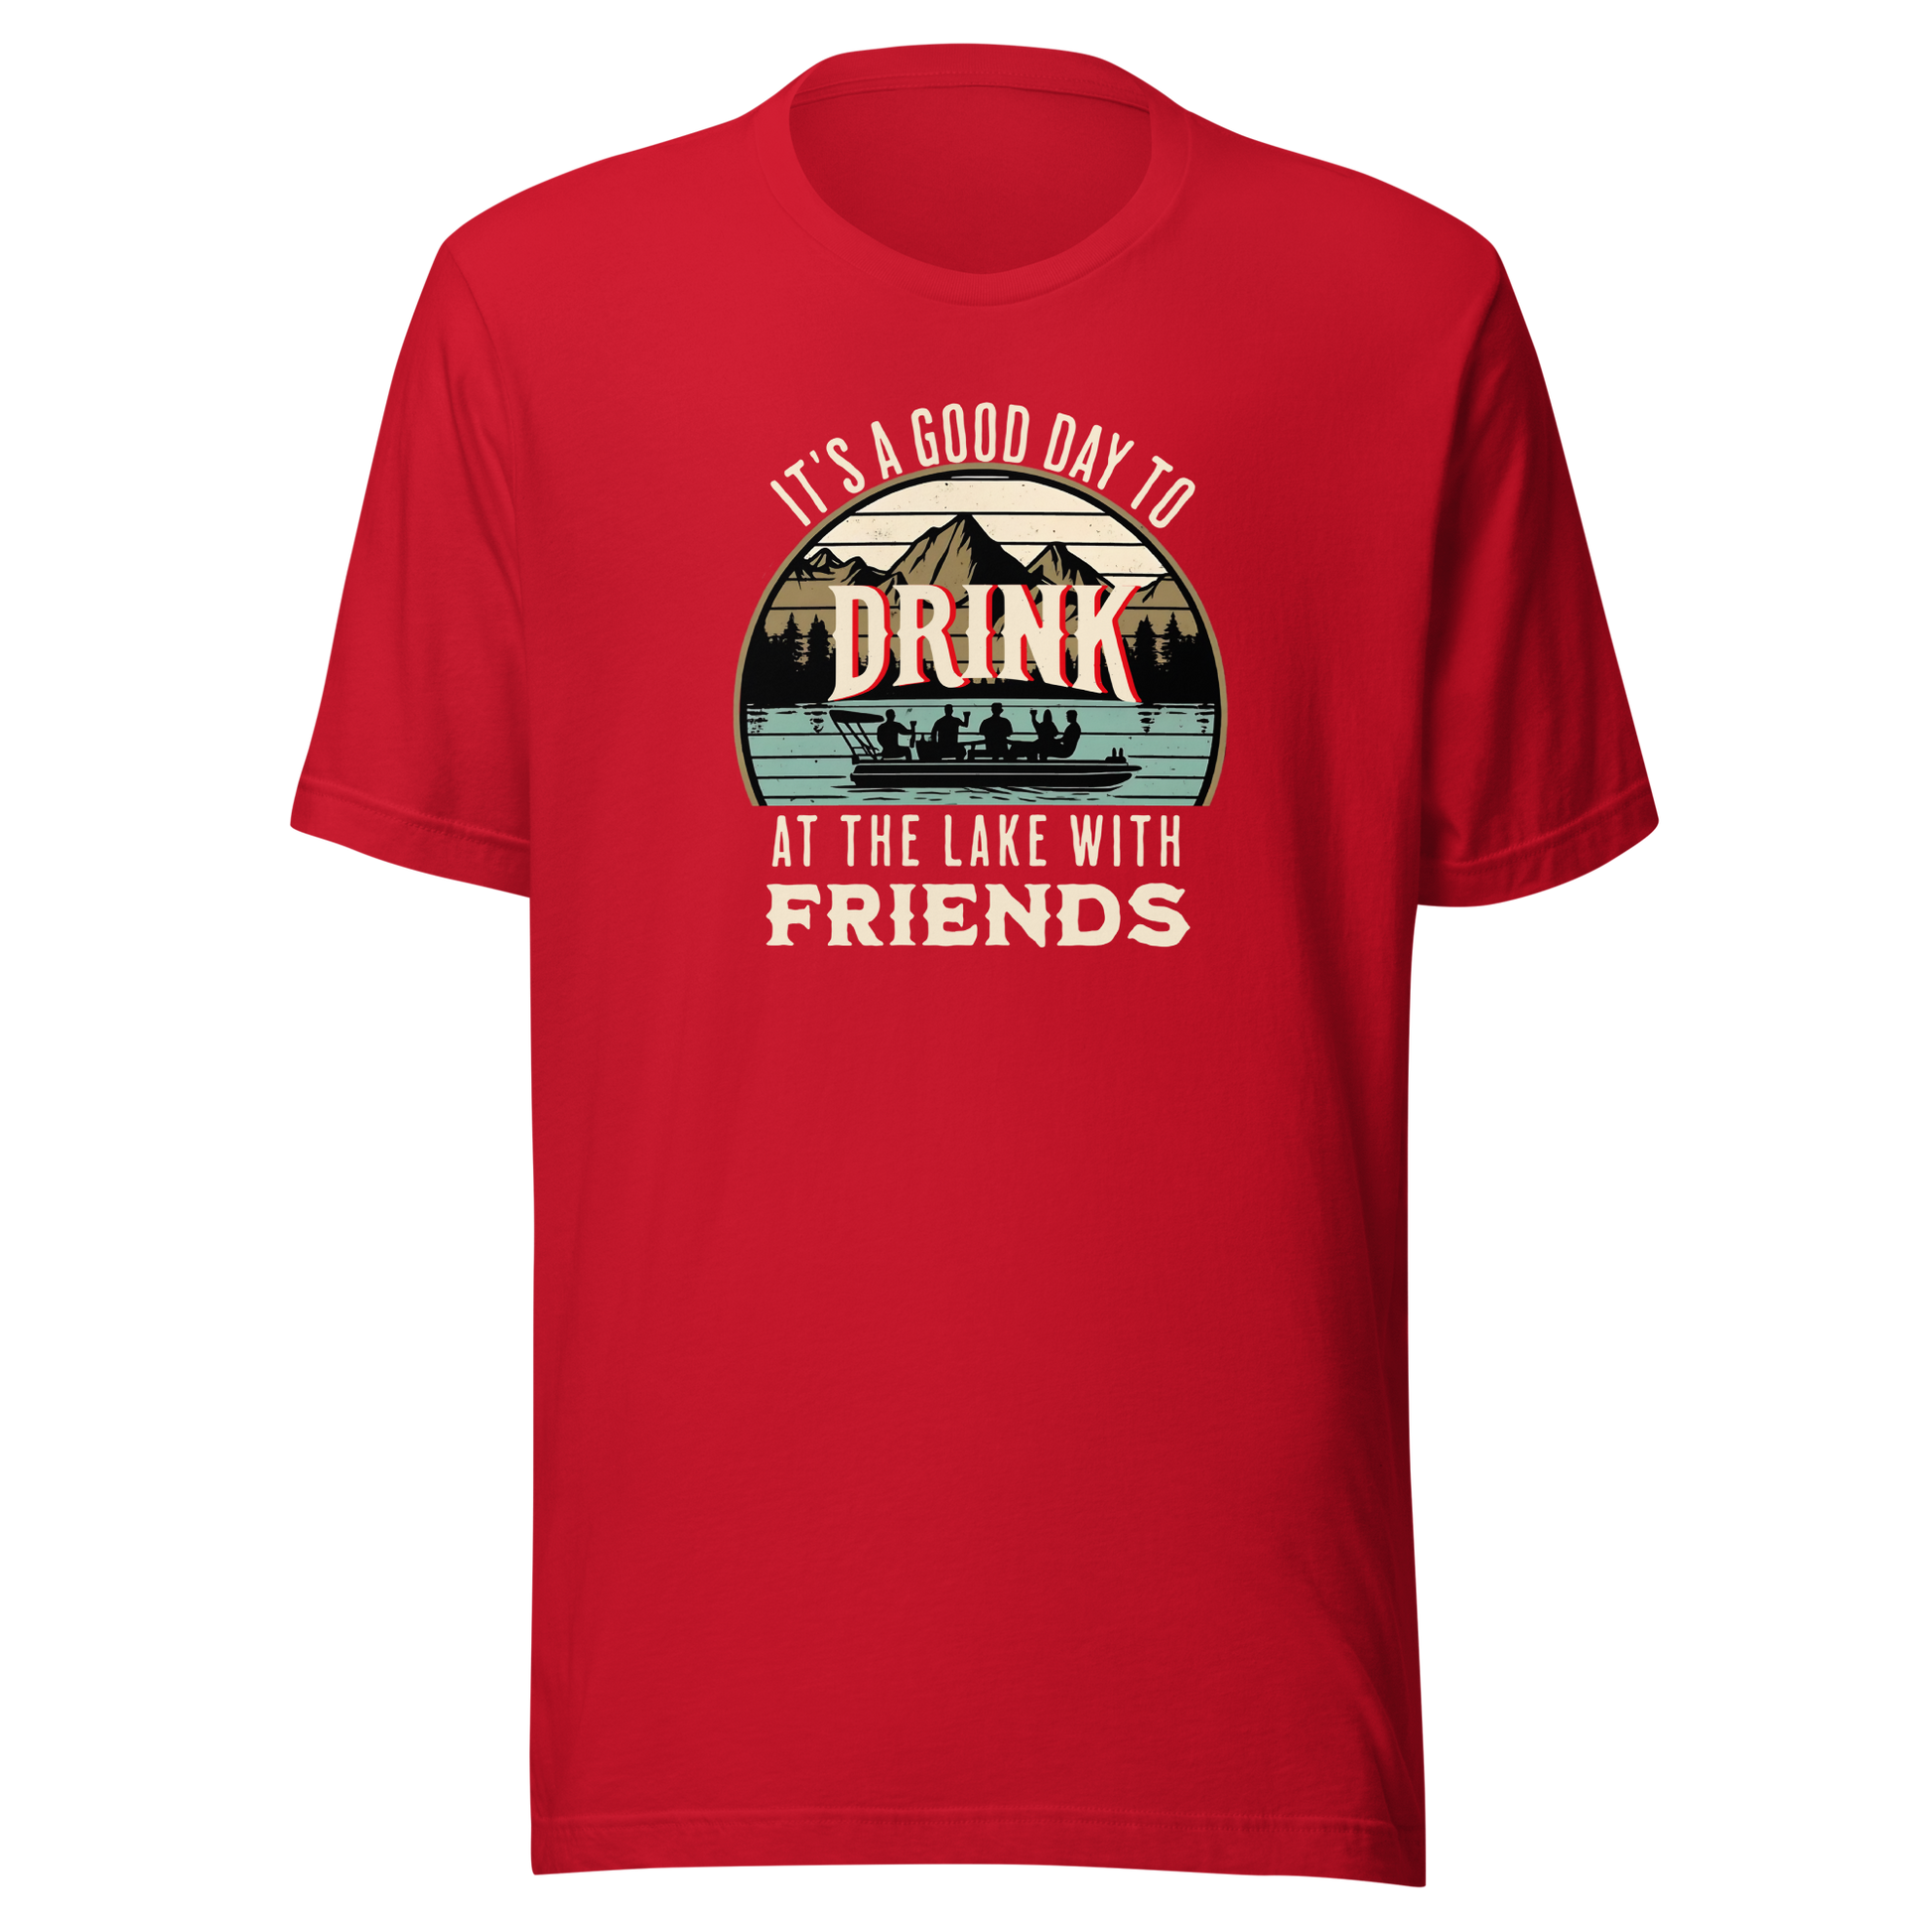 Tee with "It's a Good Day to Drink at the Lake with Friends," showing people drinking on a boat, with lake and mountain views.